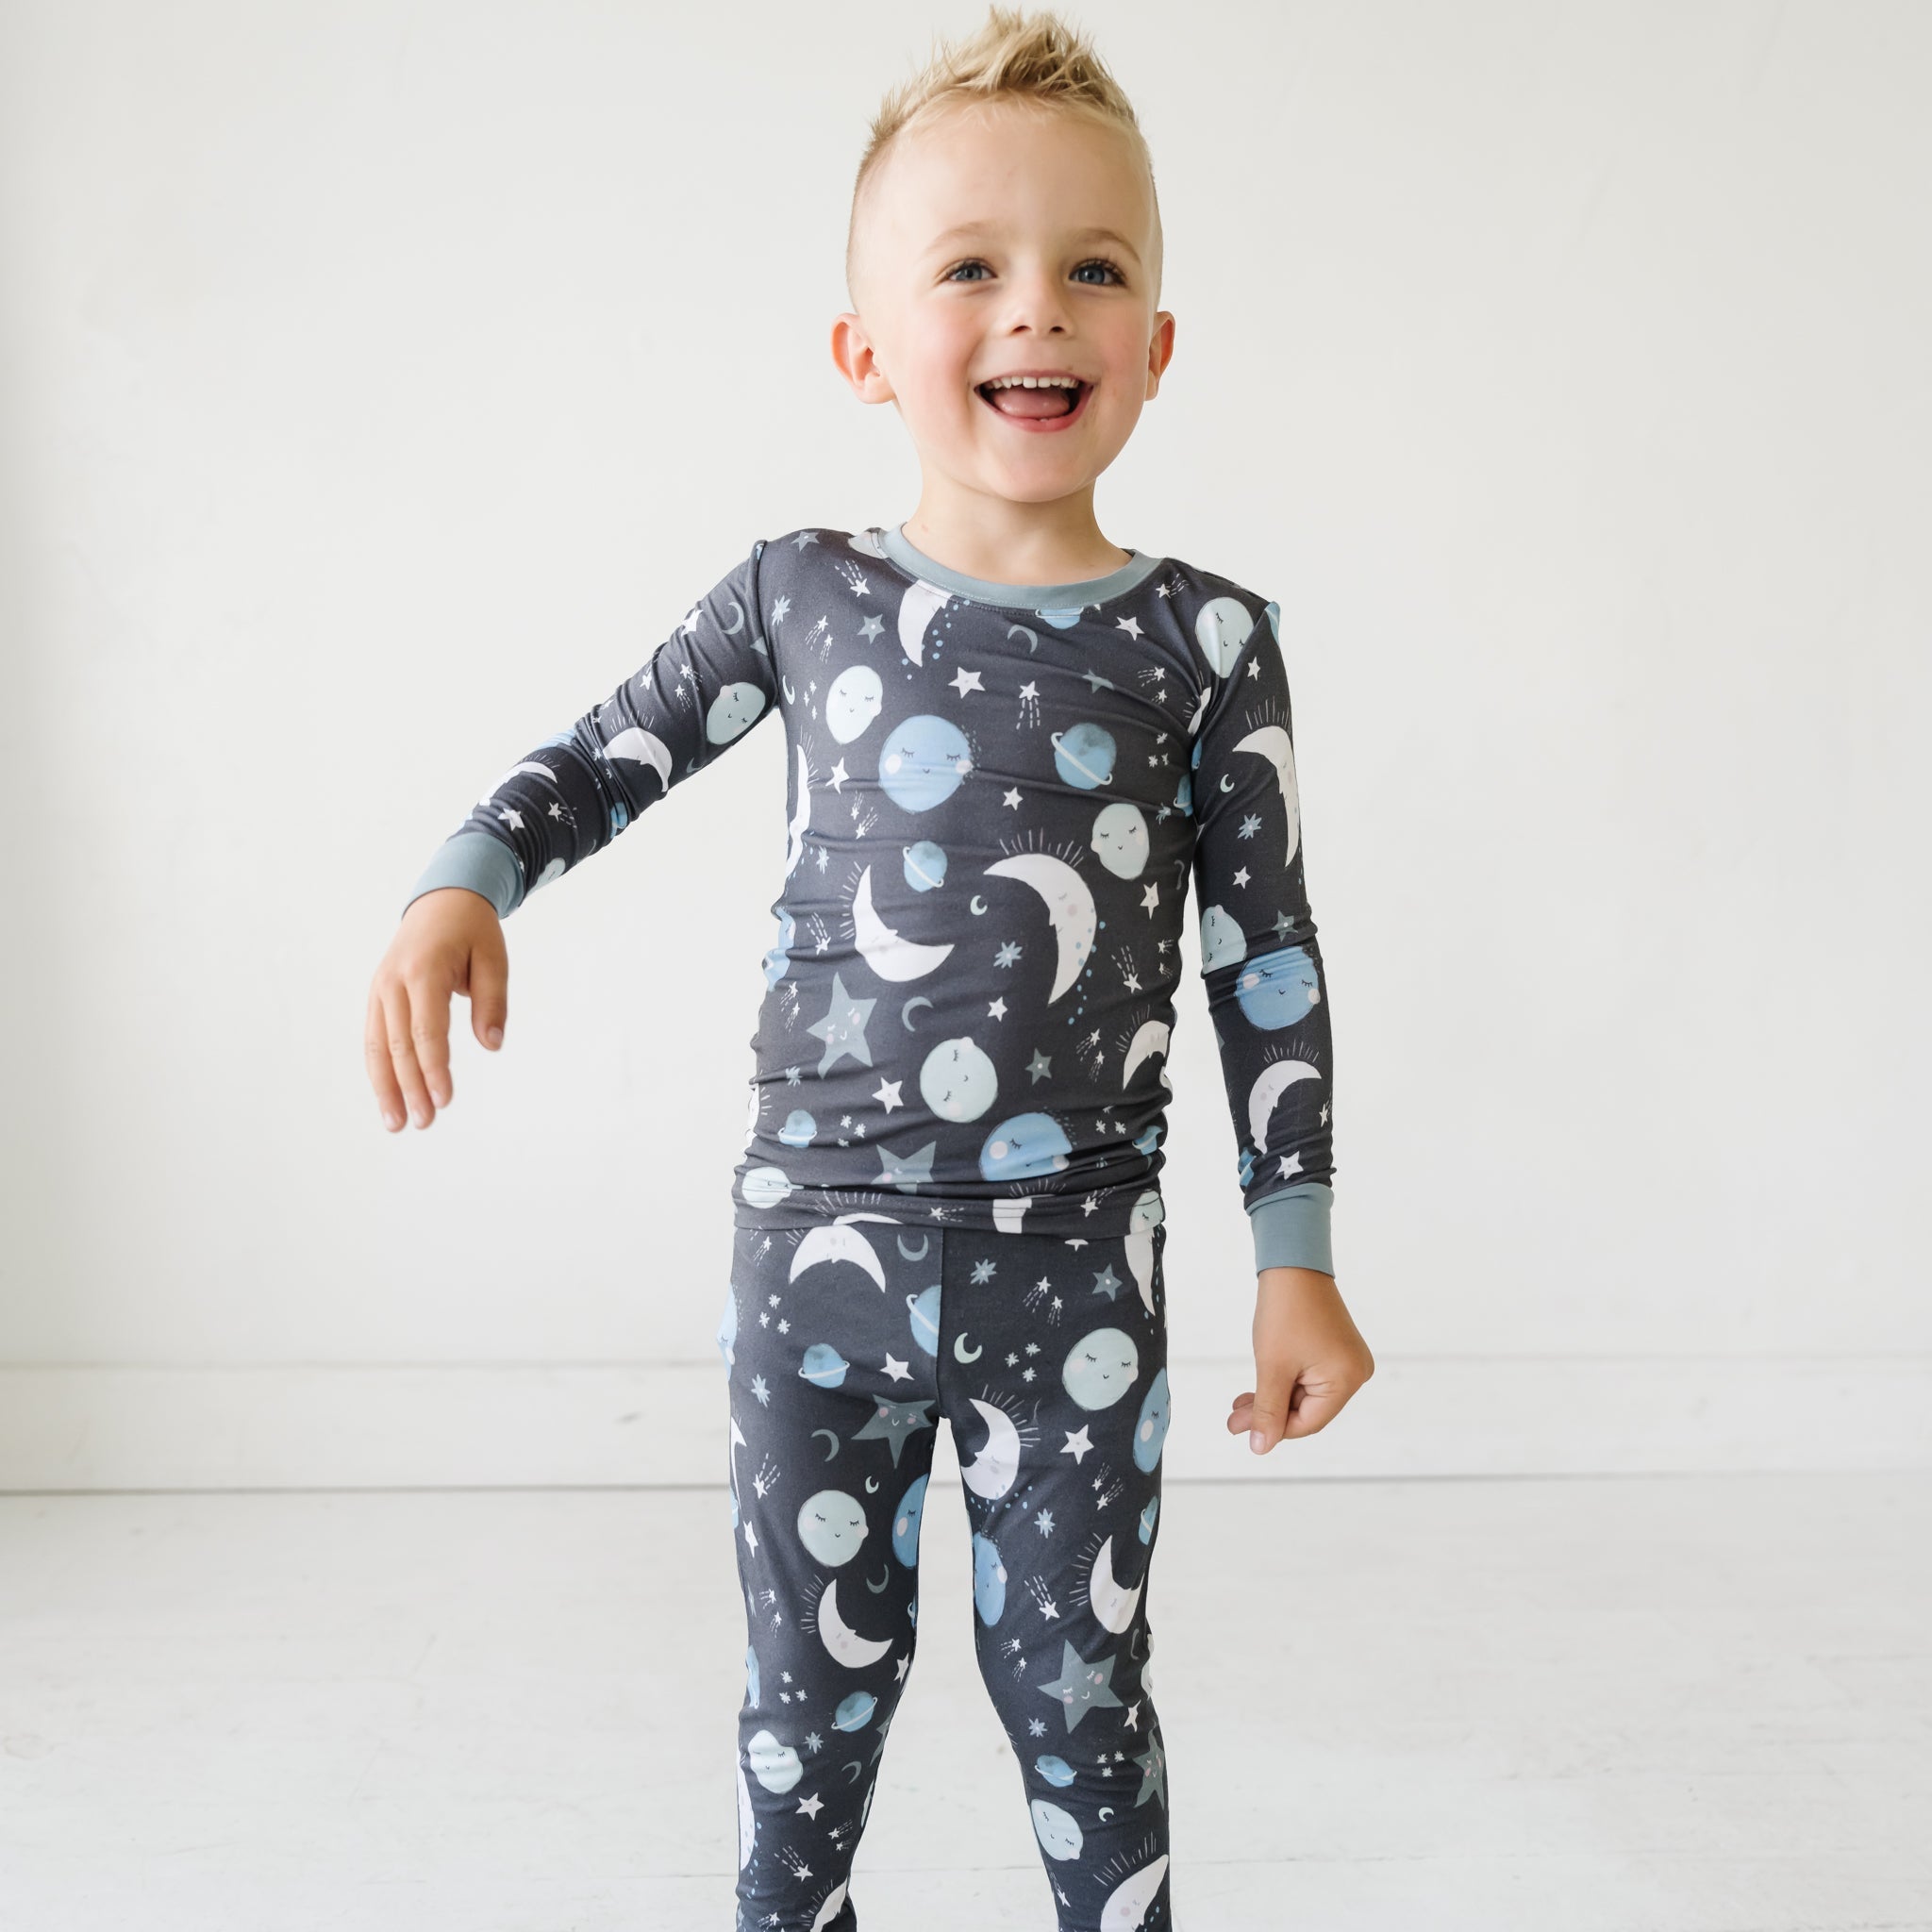 Pasta Party Two-Piece Pajama Set 2T by Little Sleepies